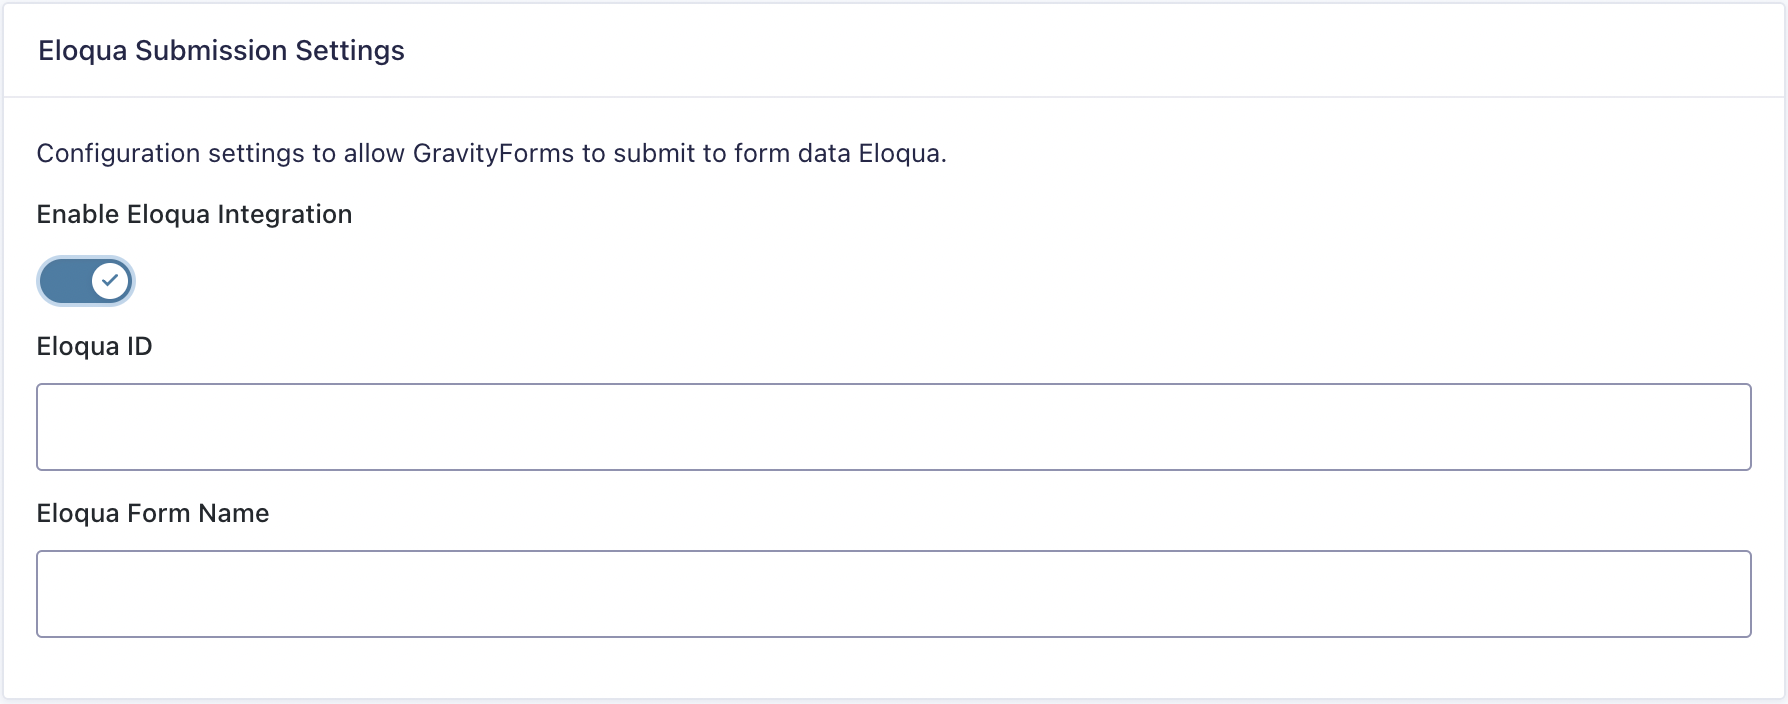 Eloqua settings for the GForm Submit to 3rd Party Plugin